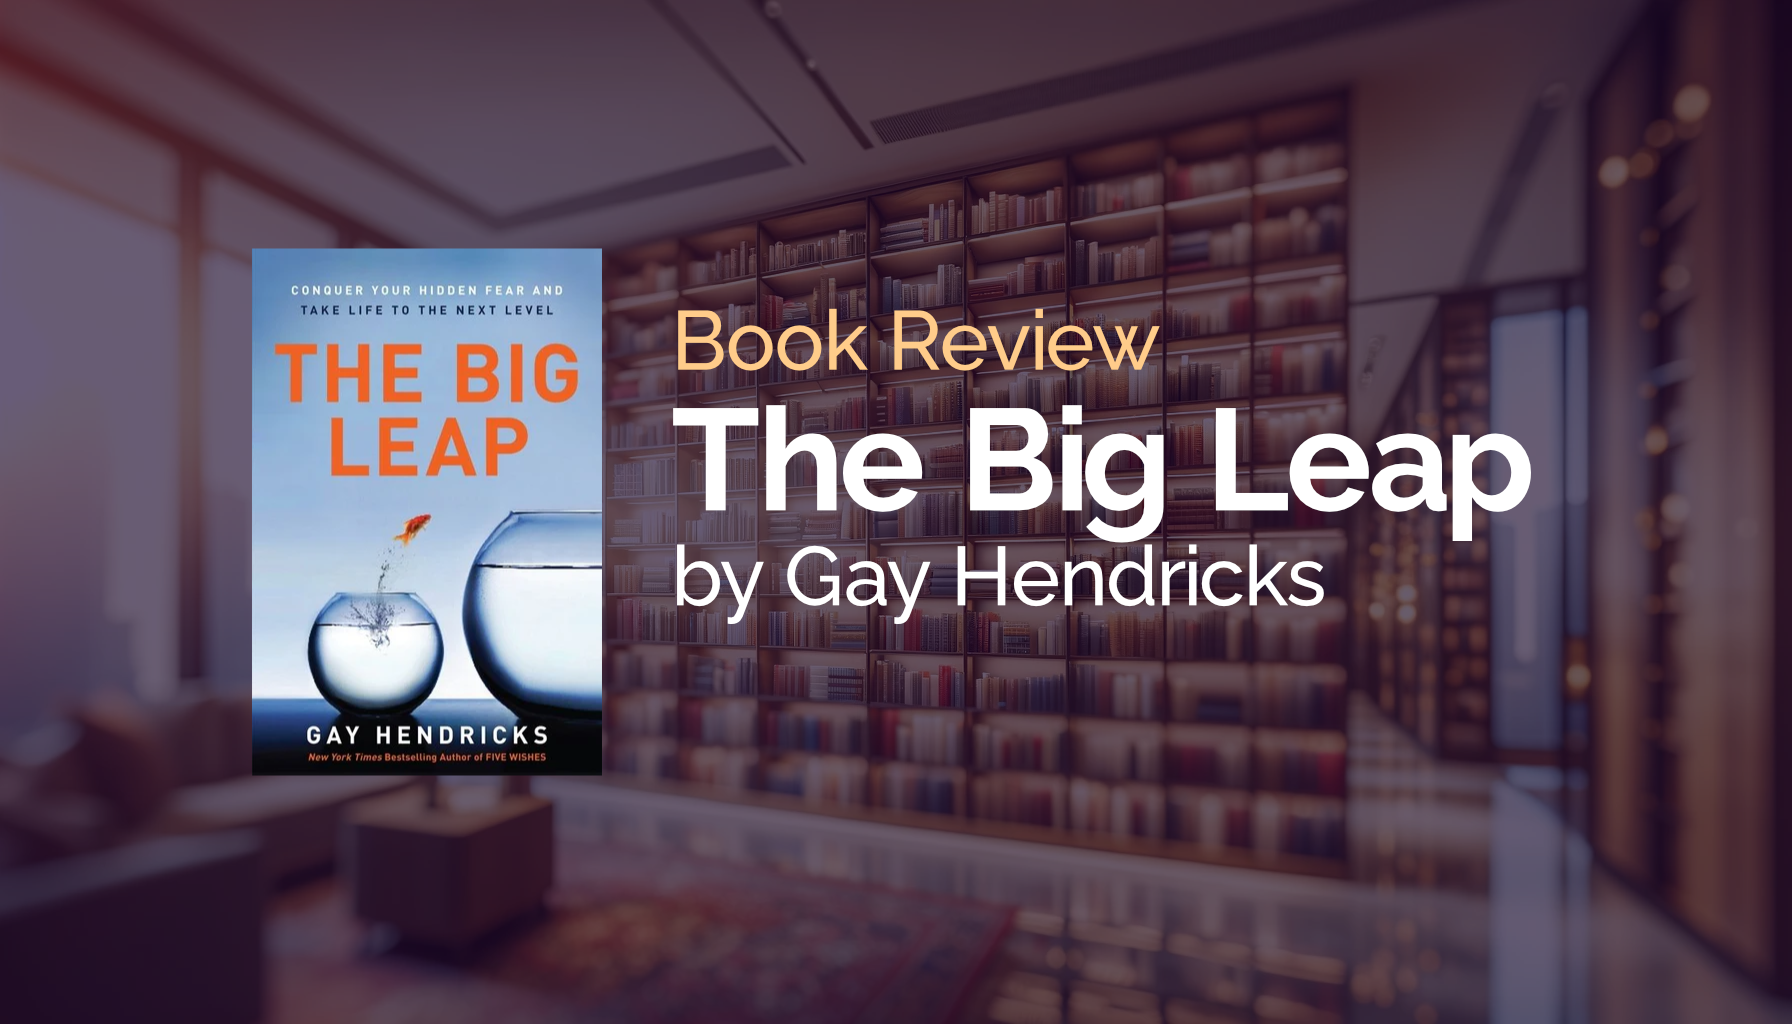 Book Review: The Big Leap by Gay Hendricks